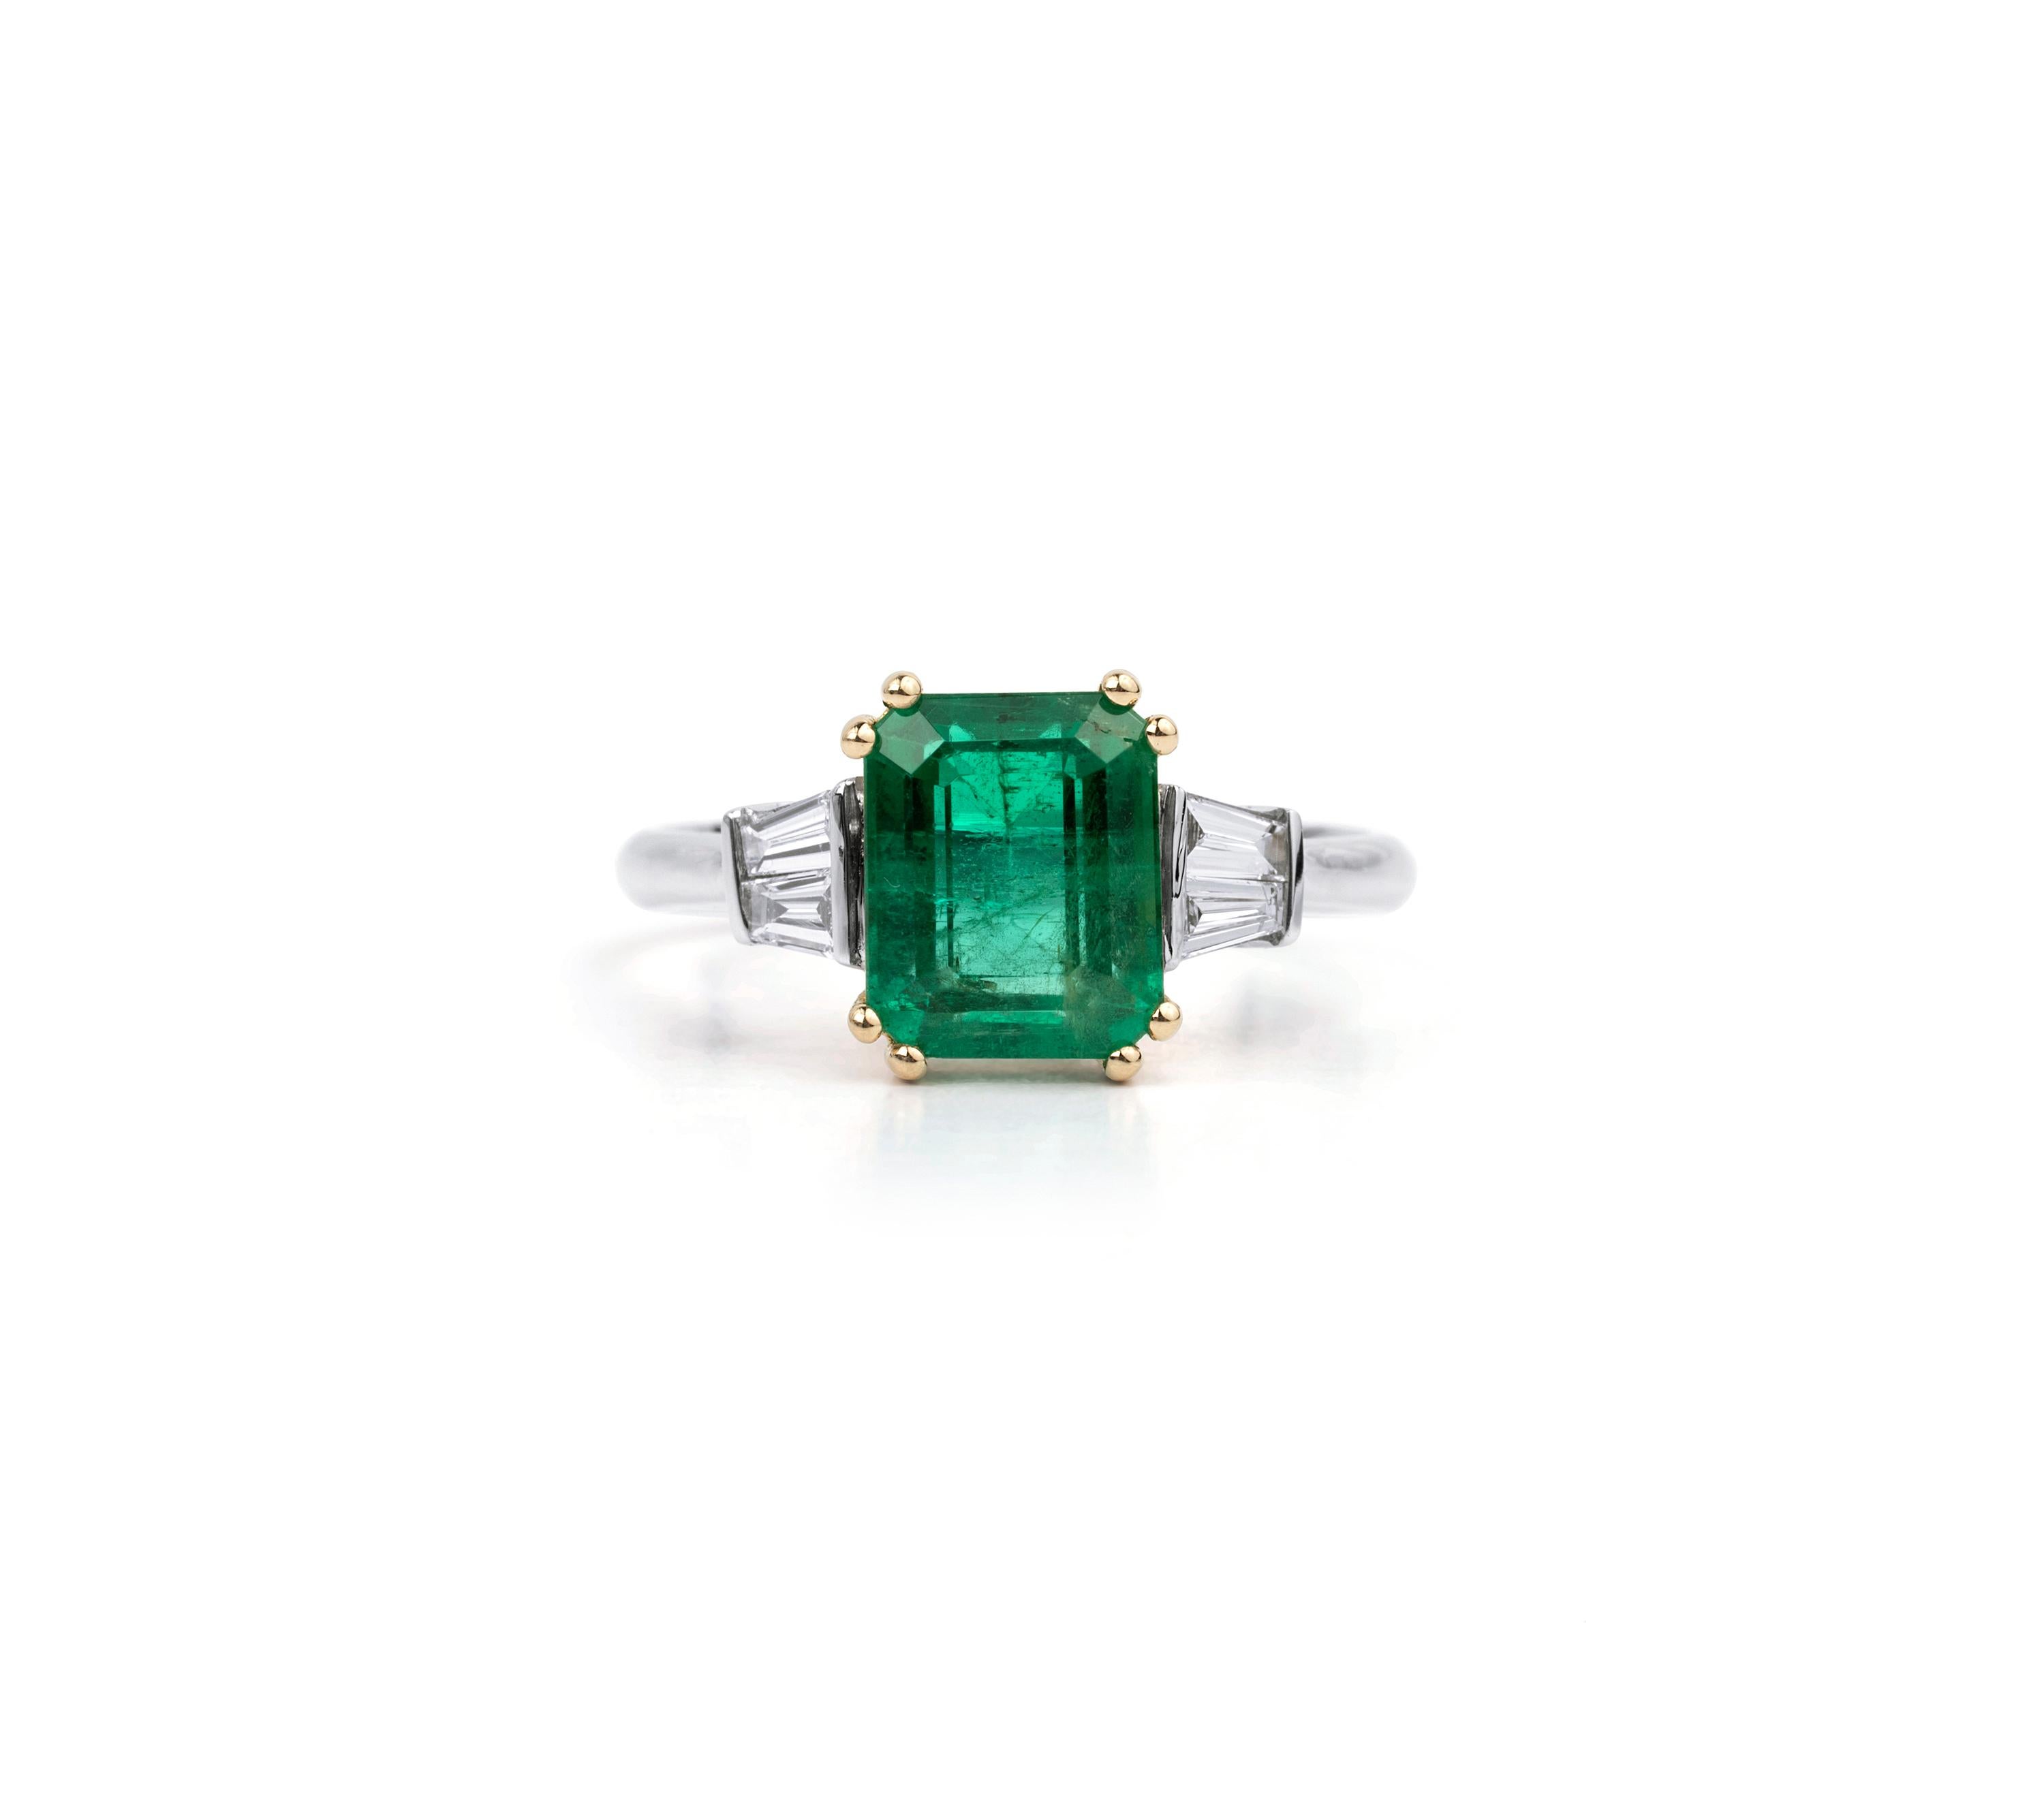 2.5 Carat Natural Emerald Diamond Cocktail Engagement Ring 18k White Gold

Available in 18k white gold.

Same design can be made also with other custom gemstones per request.

Product details:

- Solid gold

- Diamond - approx. 0.22 carat

- Emerald